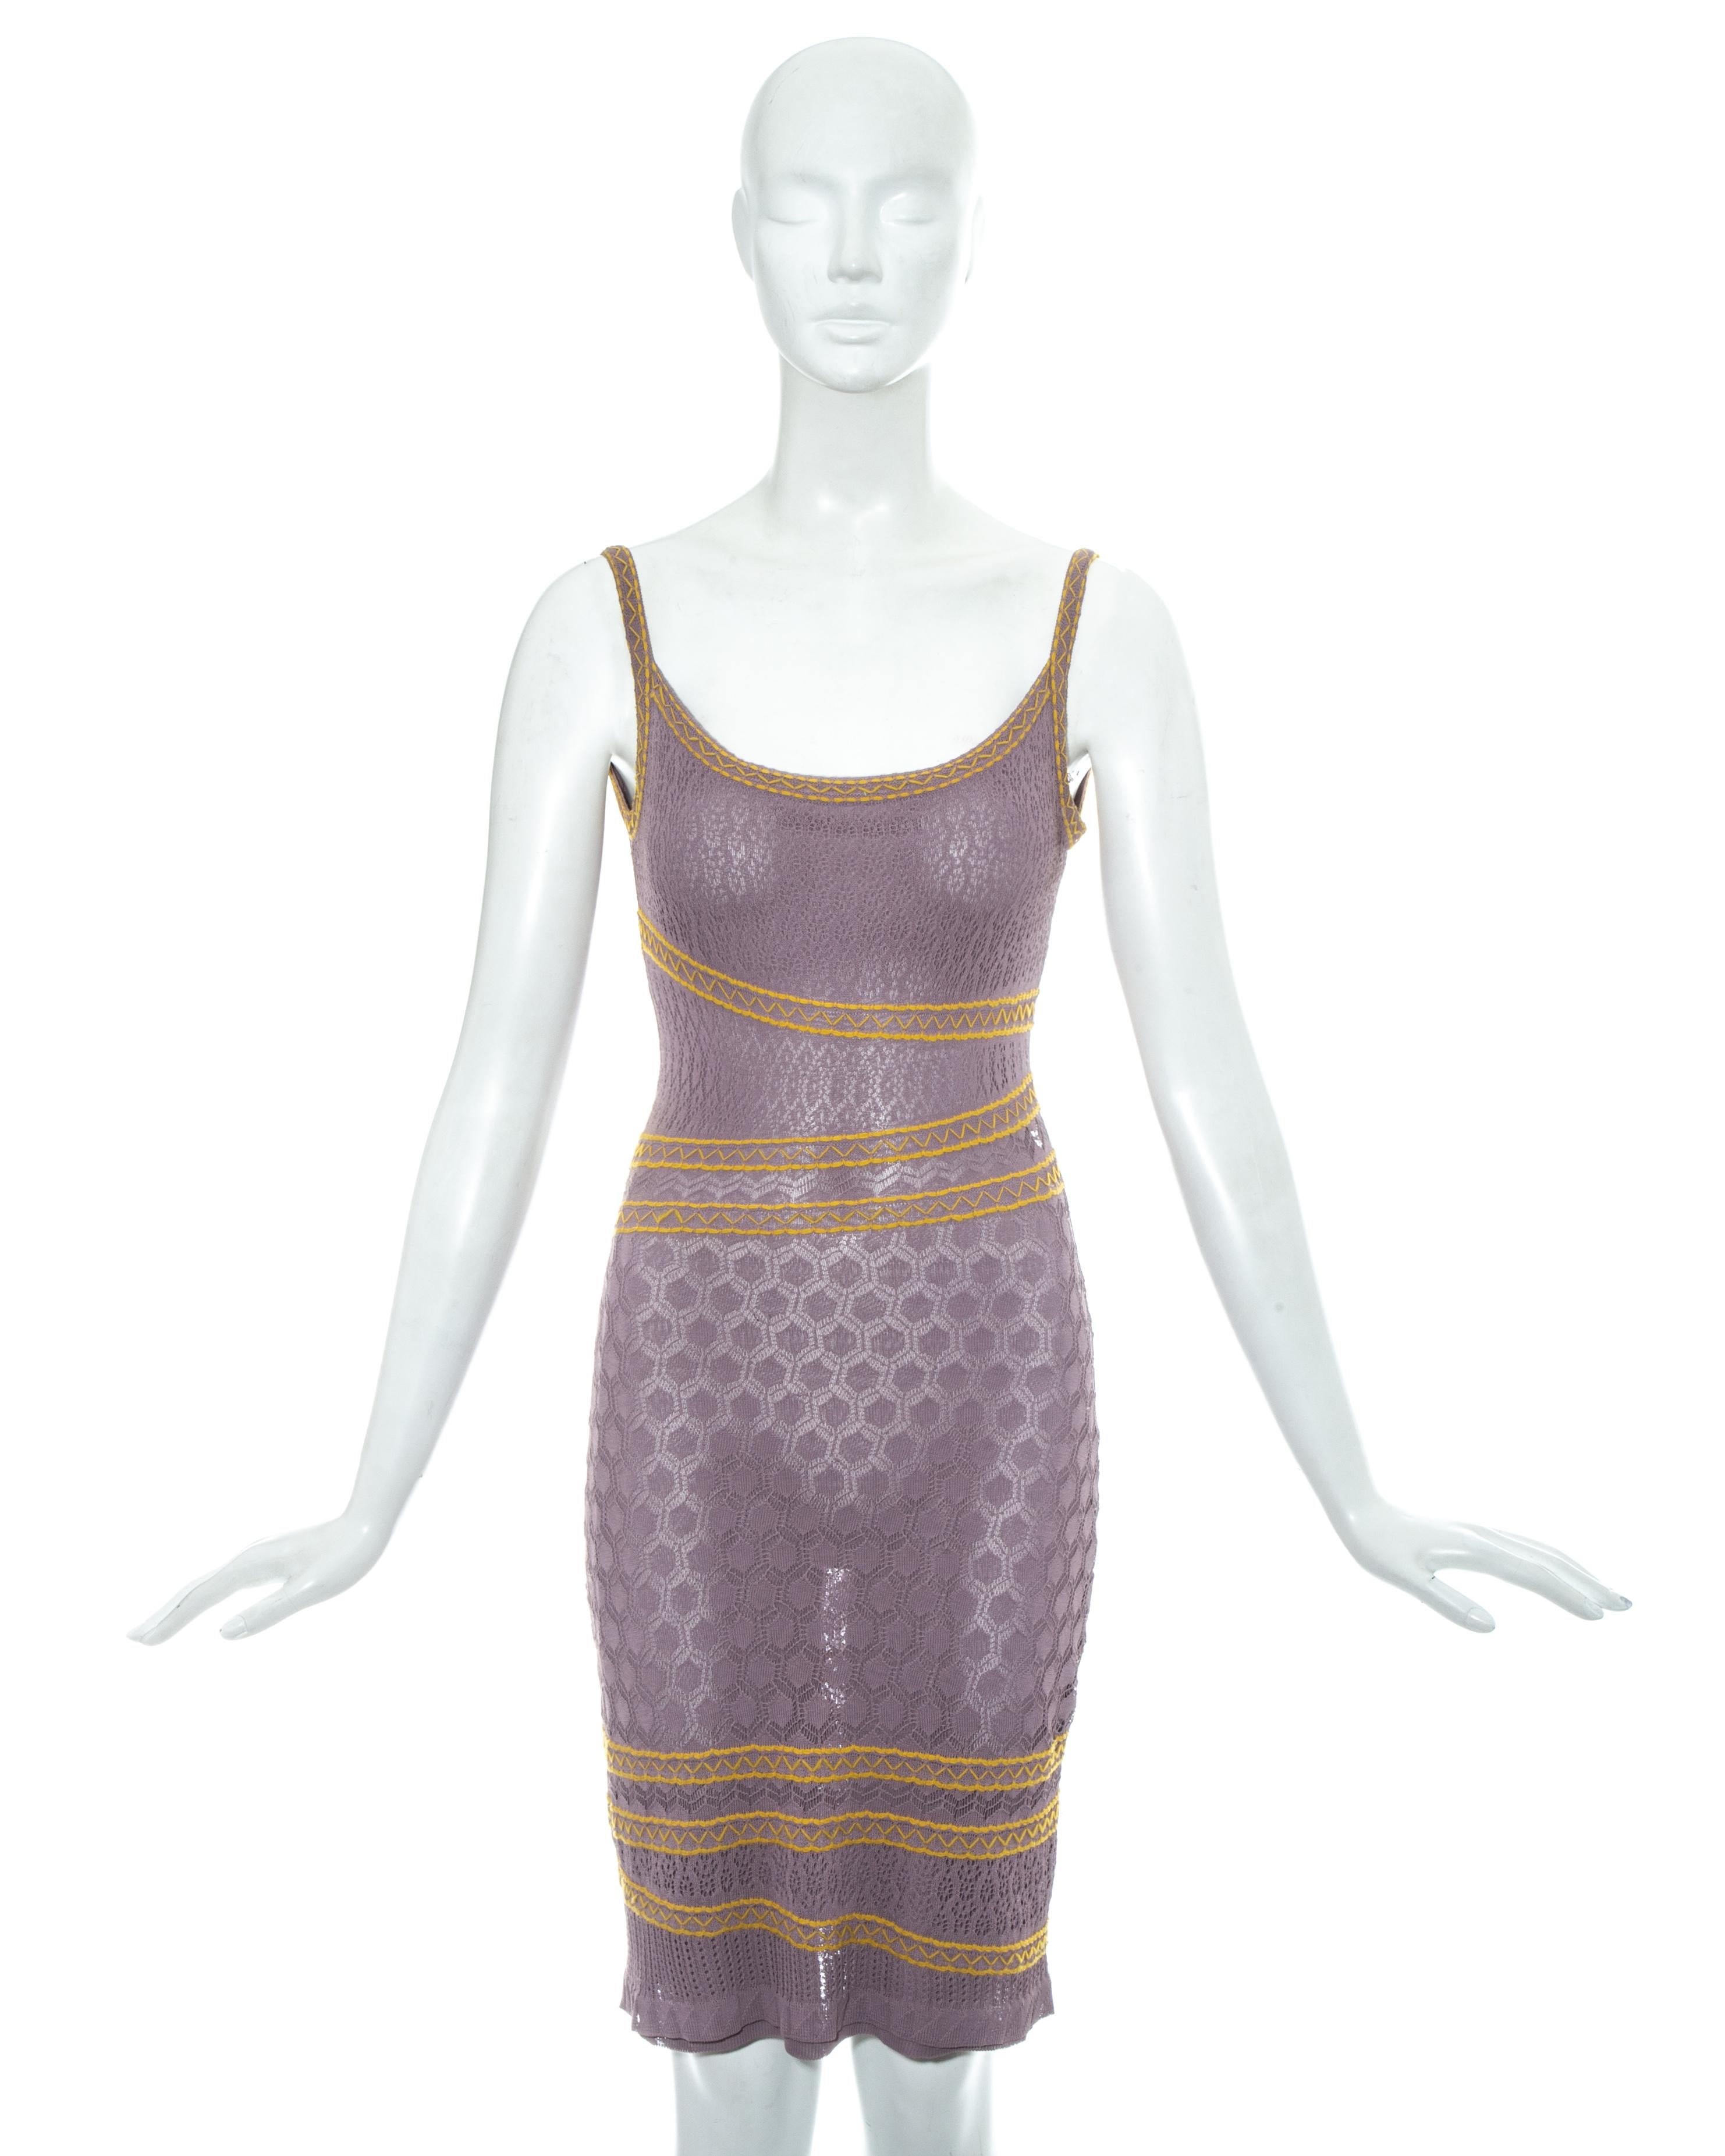 Christian Dior by John Galliano violet knitted slip dress with yellow trim and spaghetti straps

Spring-Summer 2000